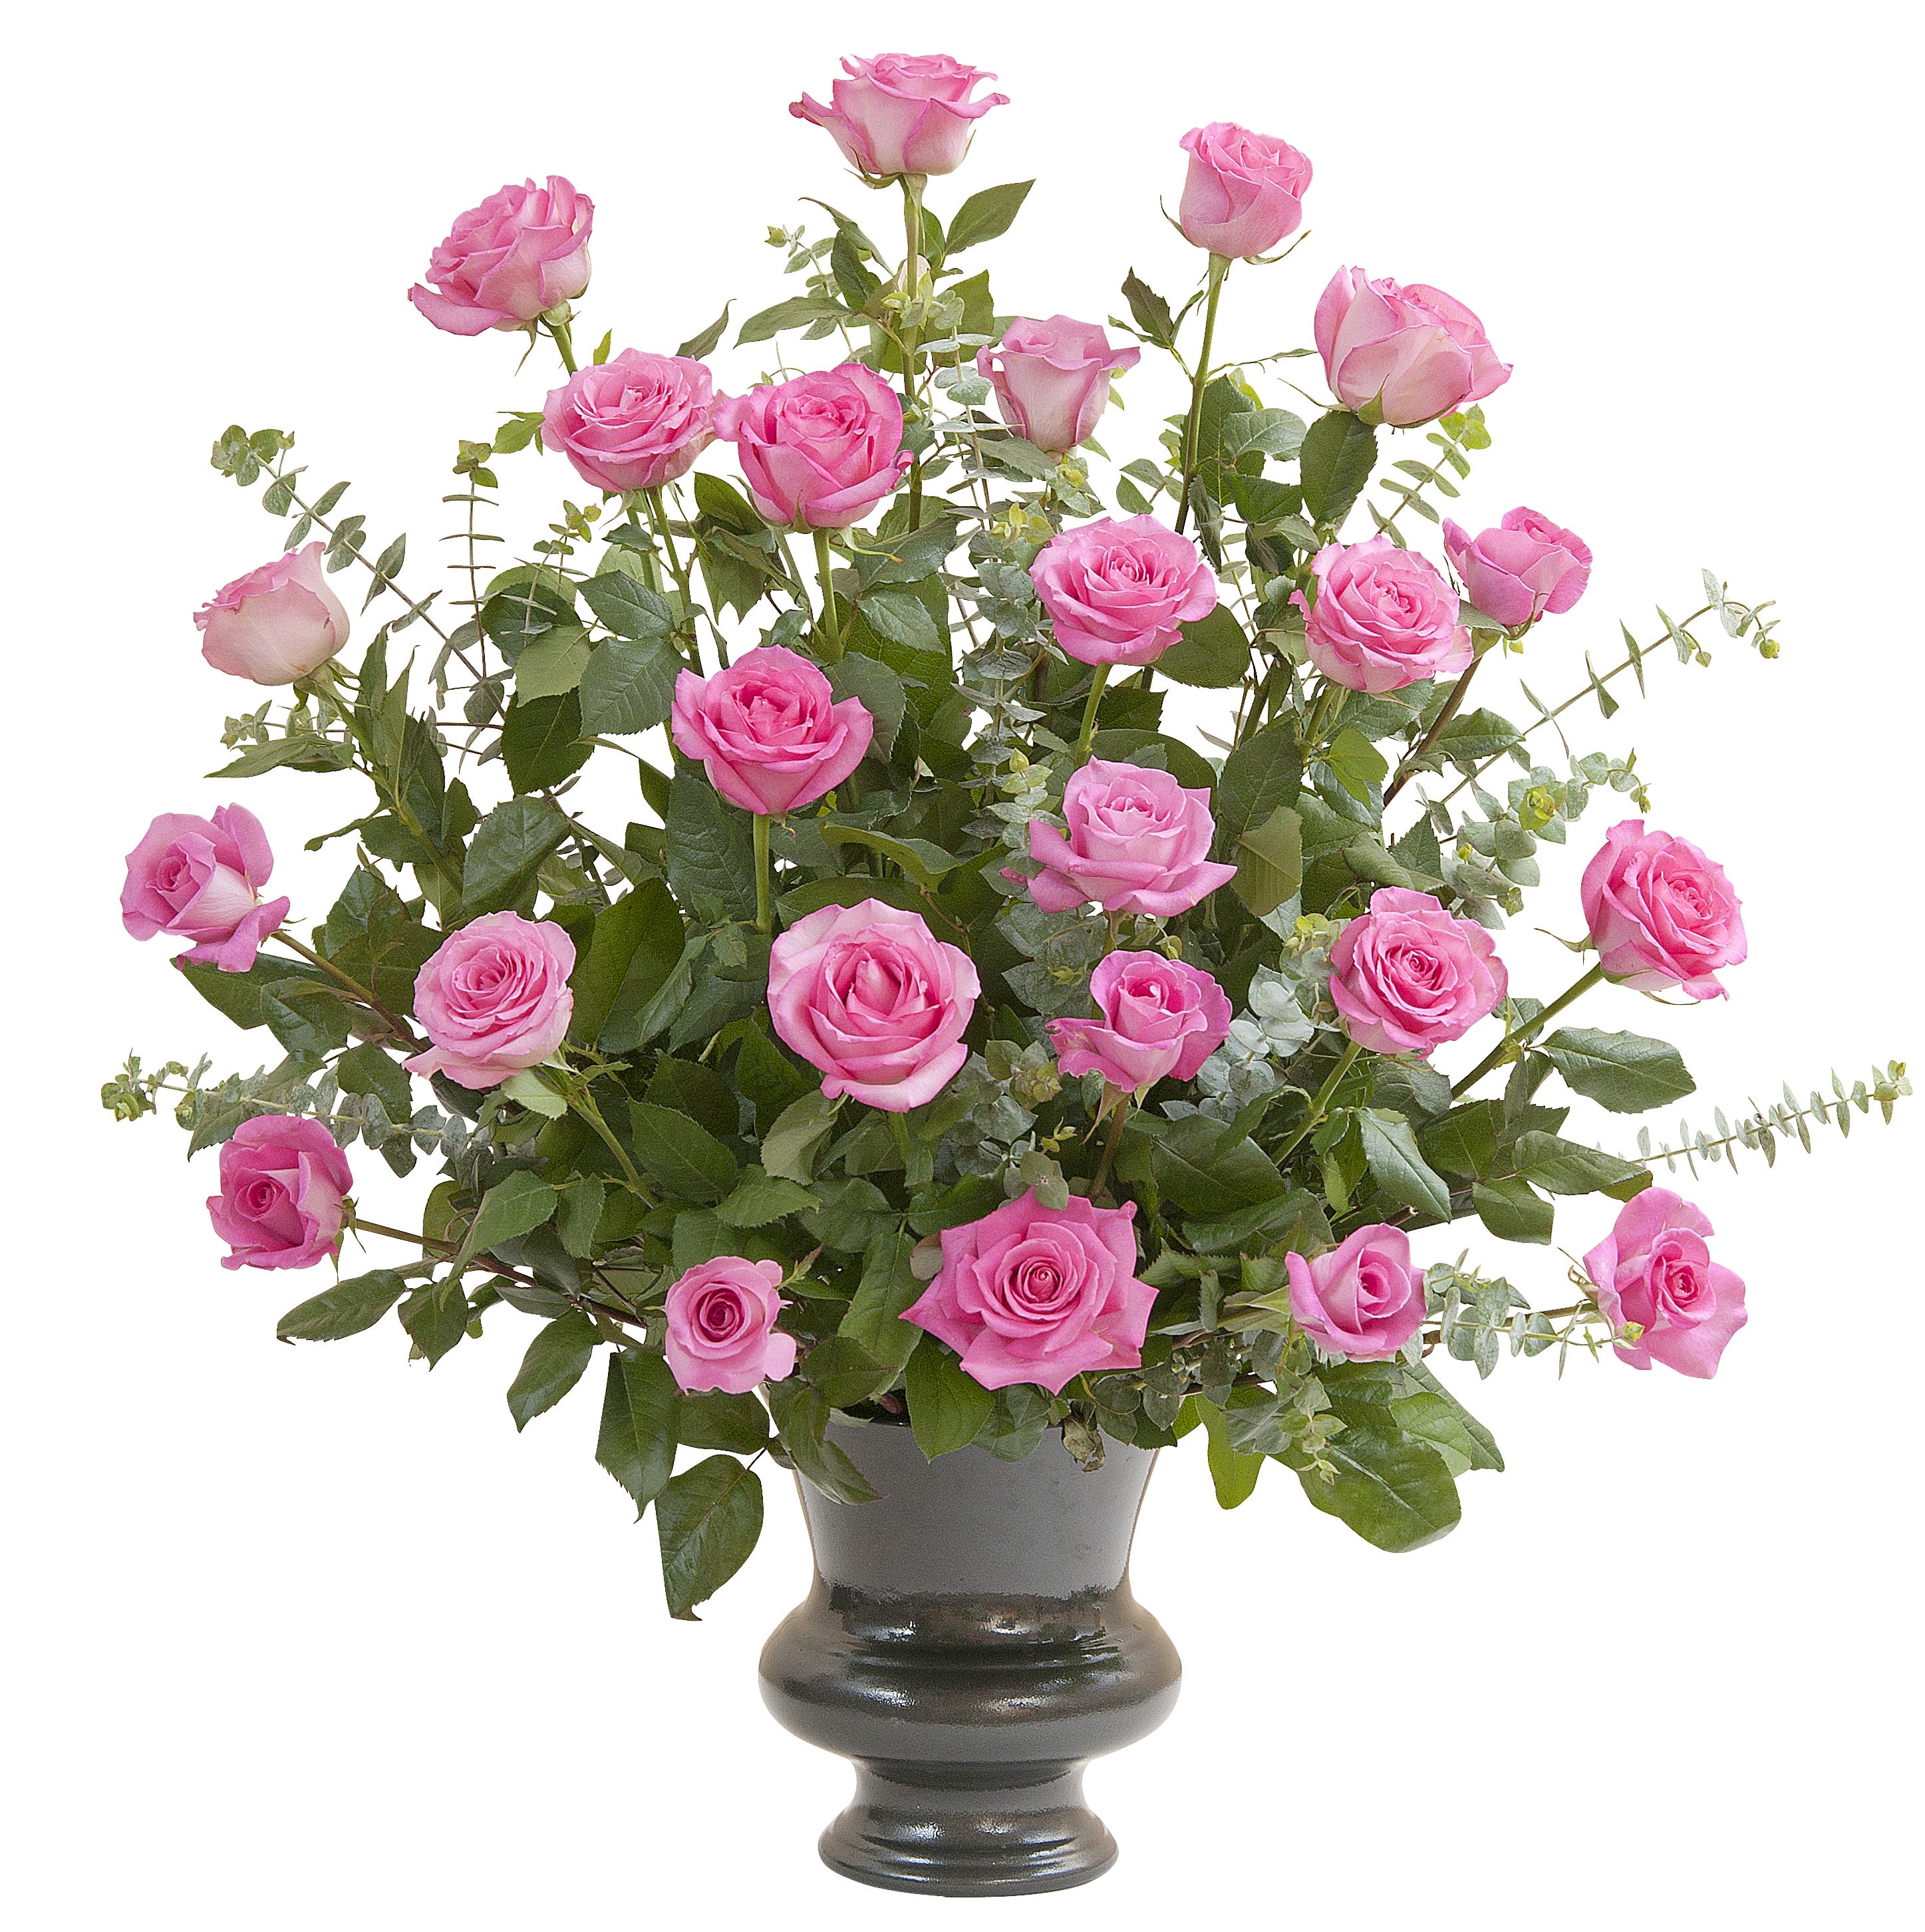 Pink Rose Supreme - Deluxe - Pink Roses and Eucalyptus in an urn.